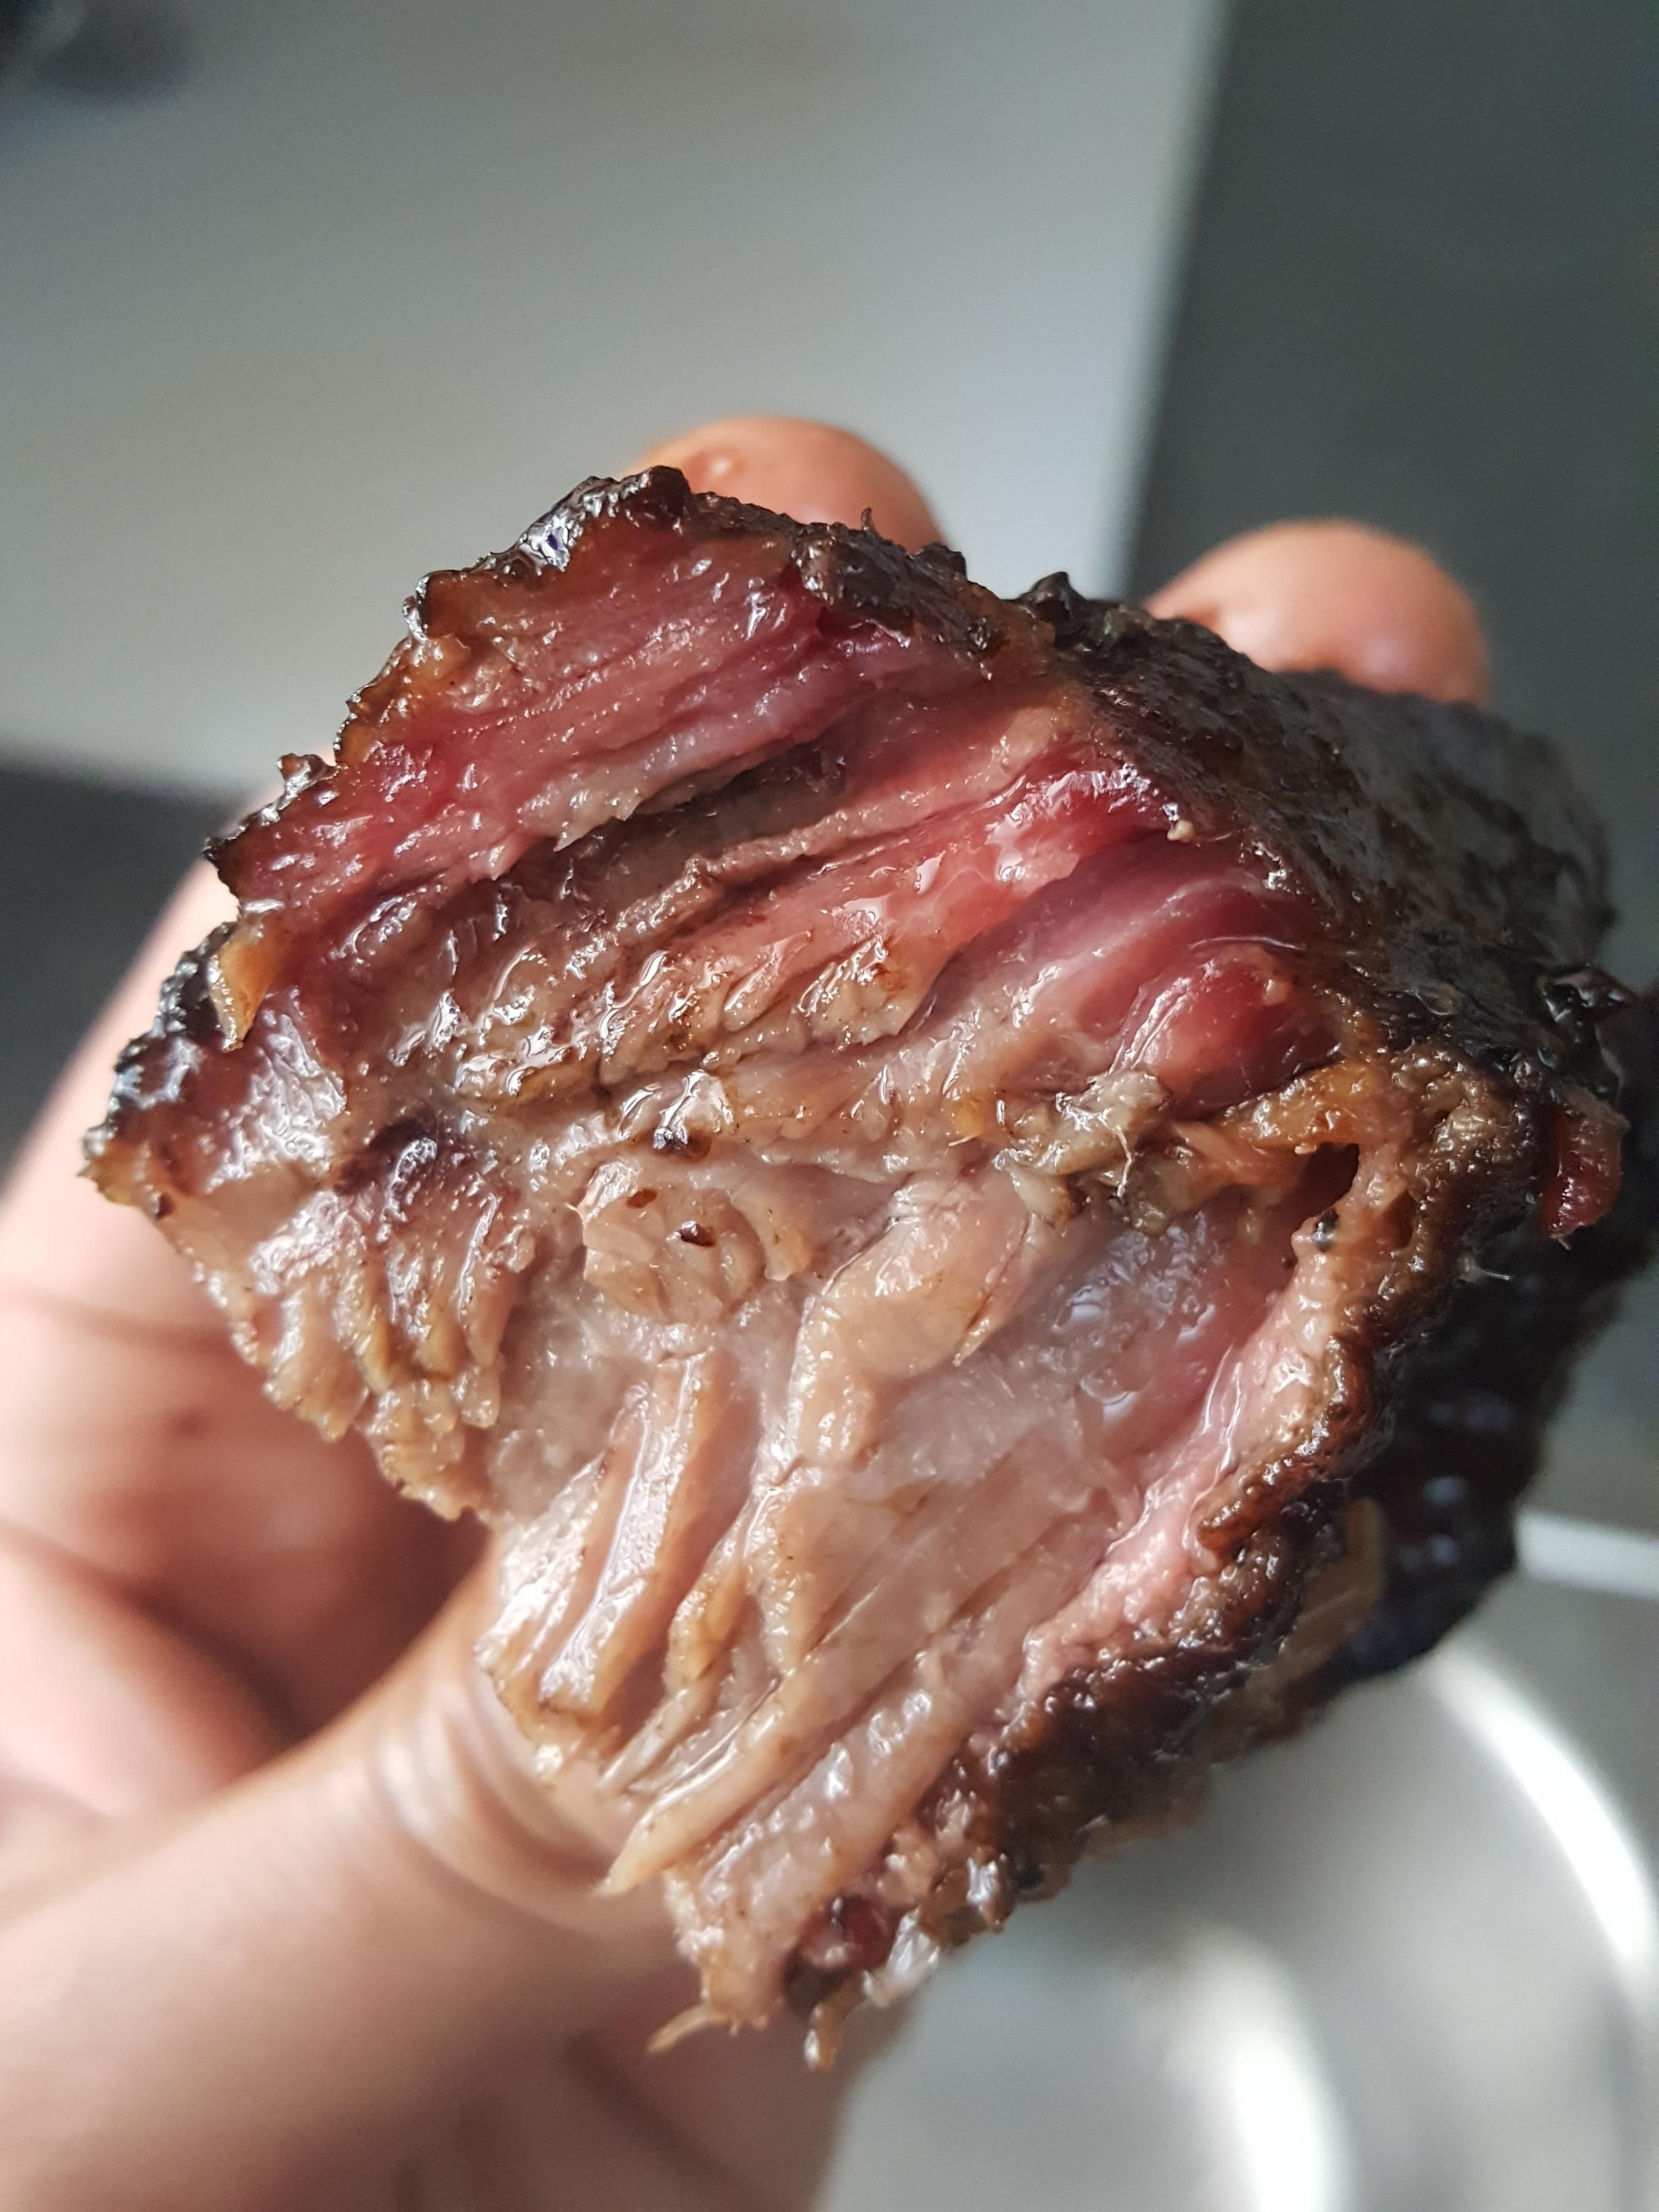 Brisket smoked for 12 hours with hickory